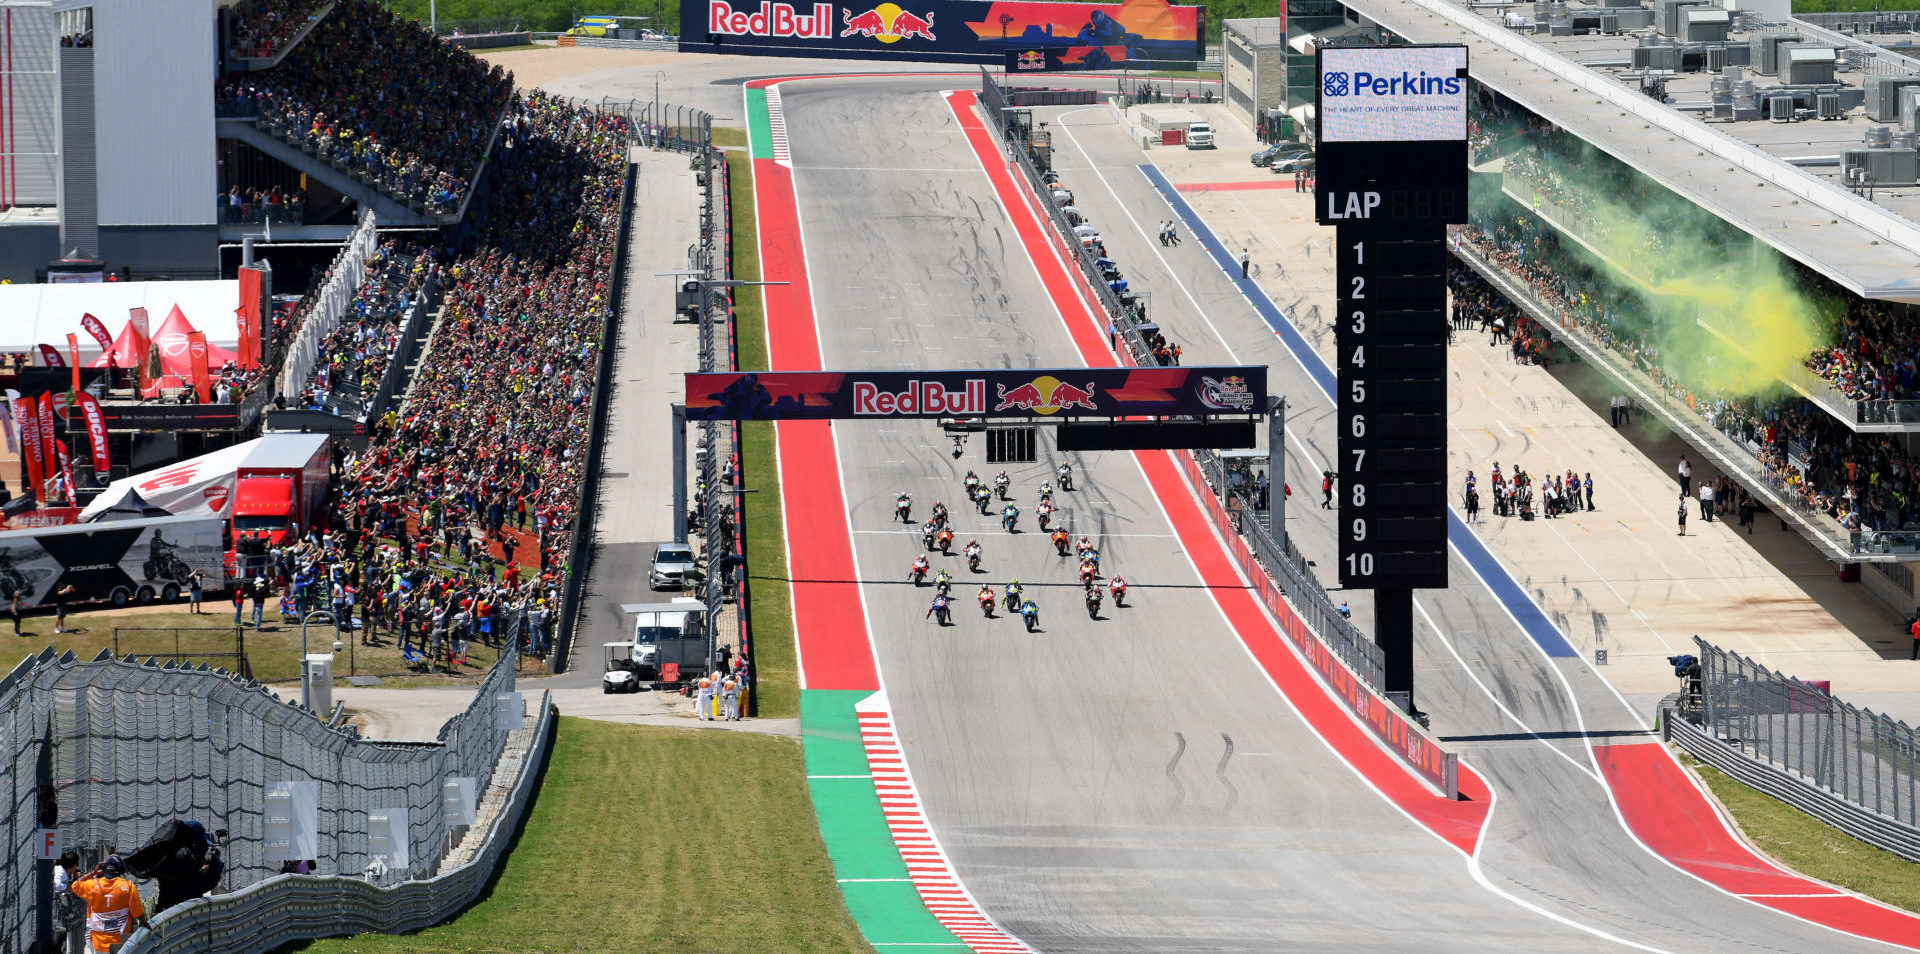 The start of the MotoGP race at COTA in 2018. Photo courtesy Michelin.